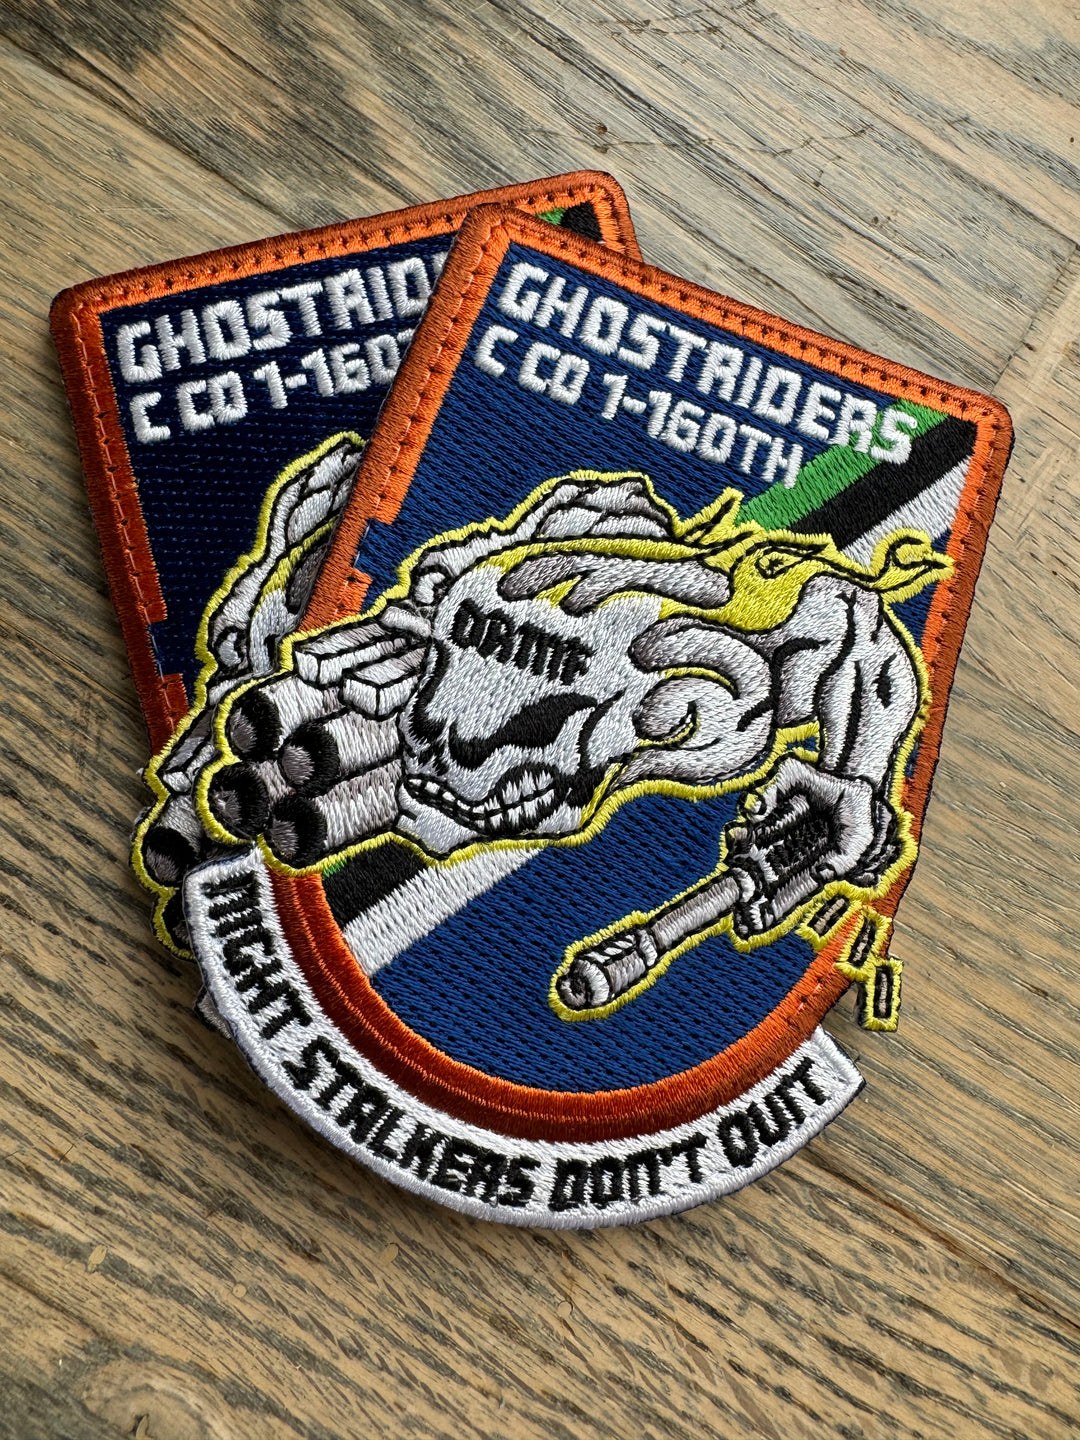 Ghostrider Memorial Patch